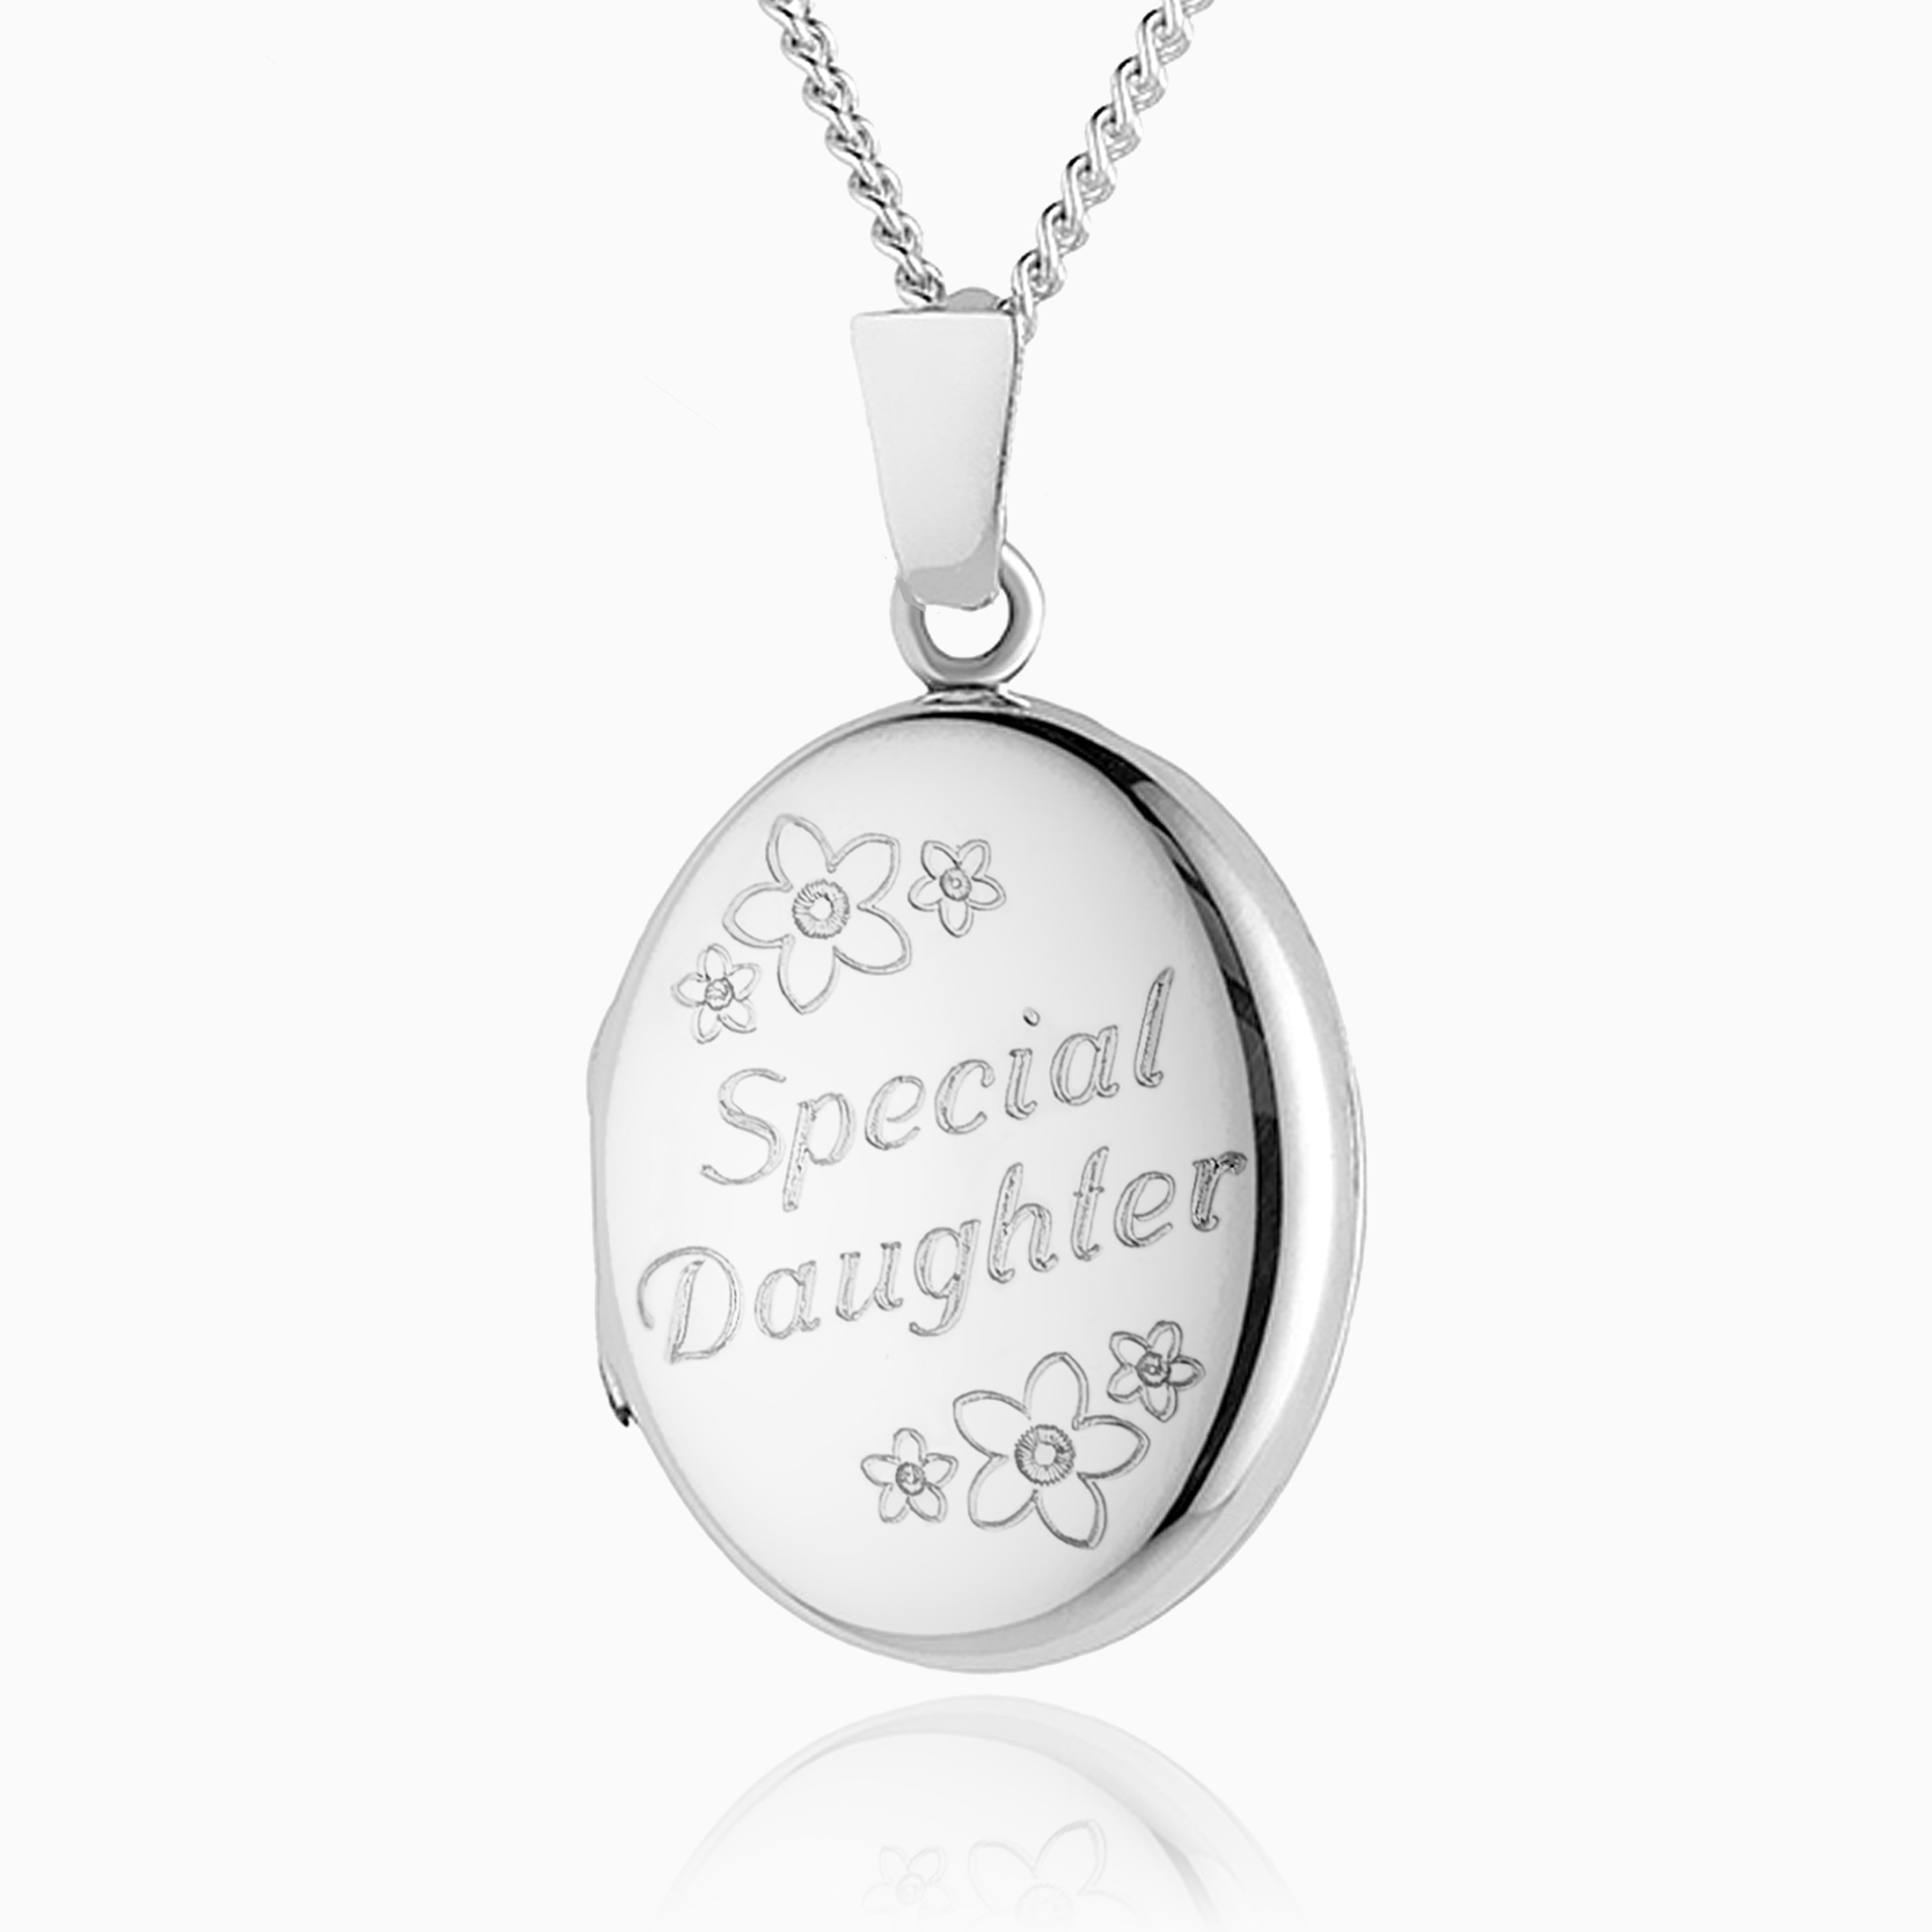 Mother Daughter Locket Matching Necklace With Inspirational | Etsy | Daughter  locket, Matching necklaces, Locket